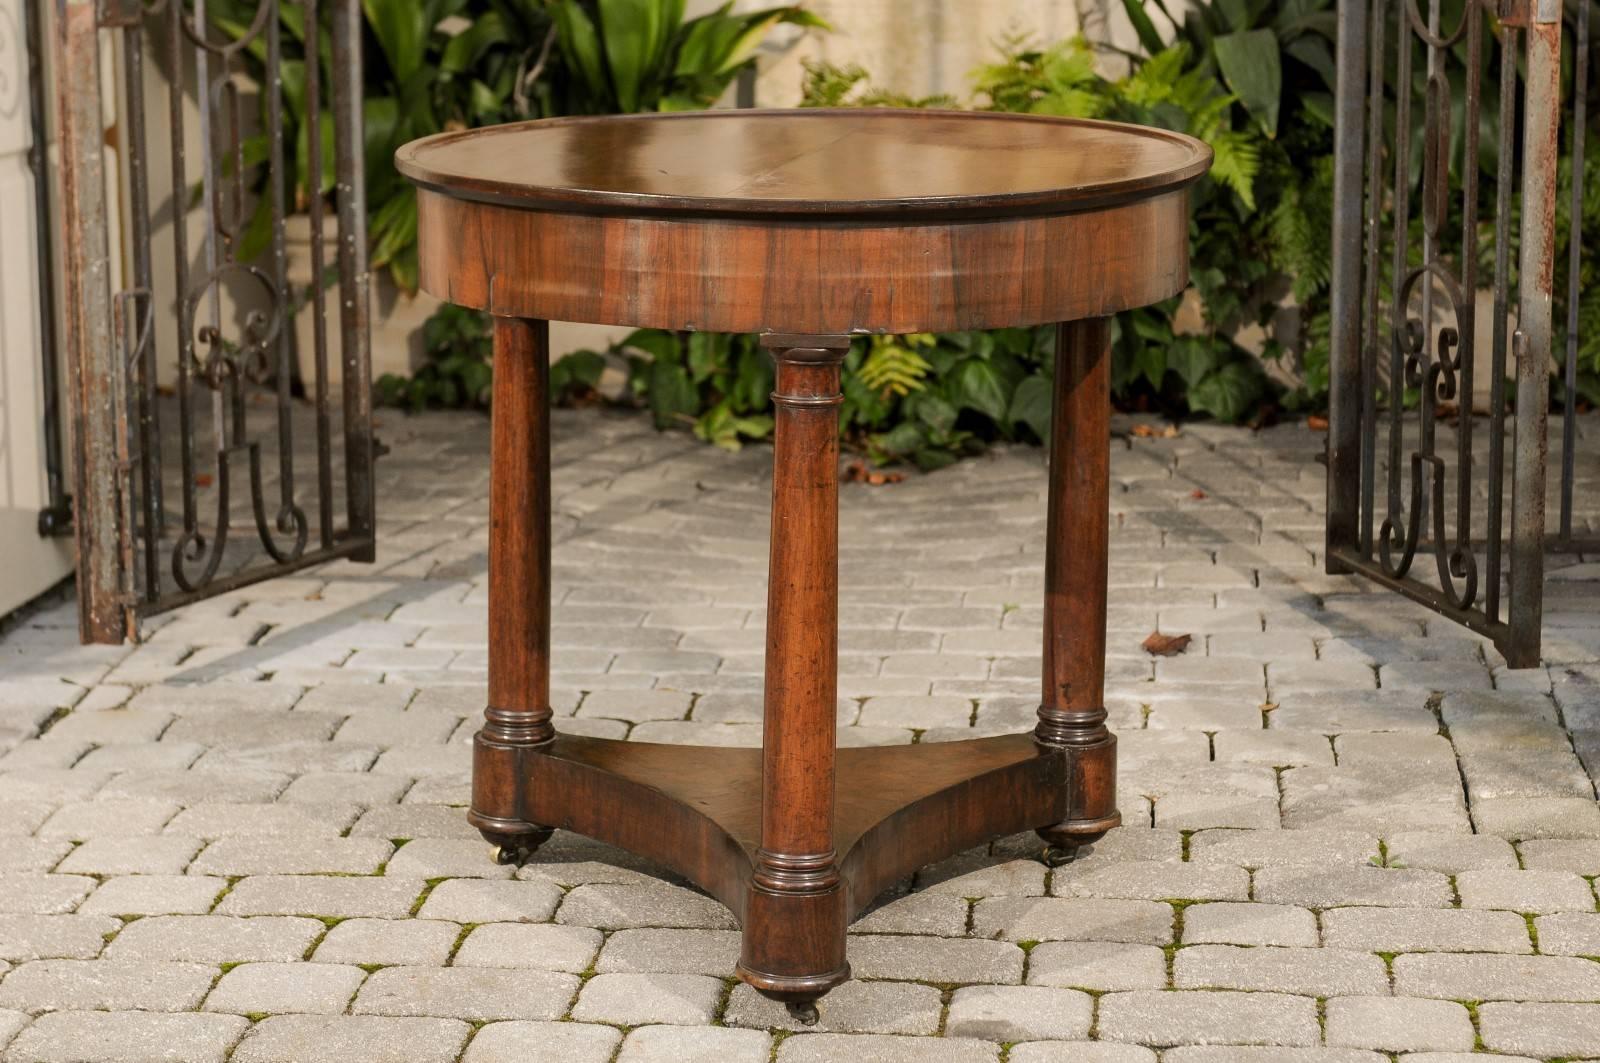 A French Empire style walnut round center table with tripod base raised on casters from the second half of the 19th century. This French centre table features a bookmarked walnut-veneered circular top sitting above a simple apron. The ensemble is